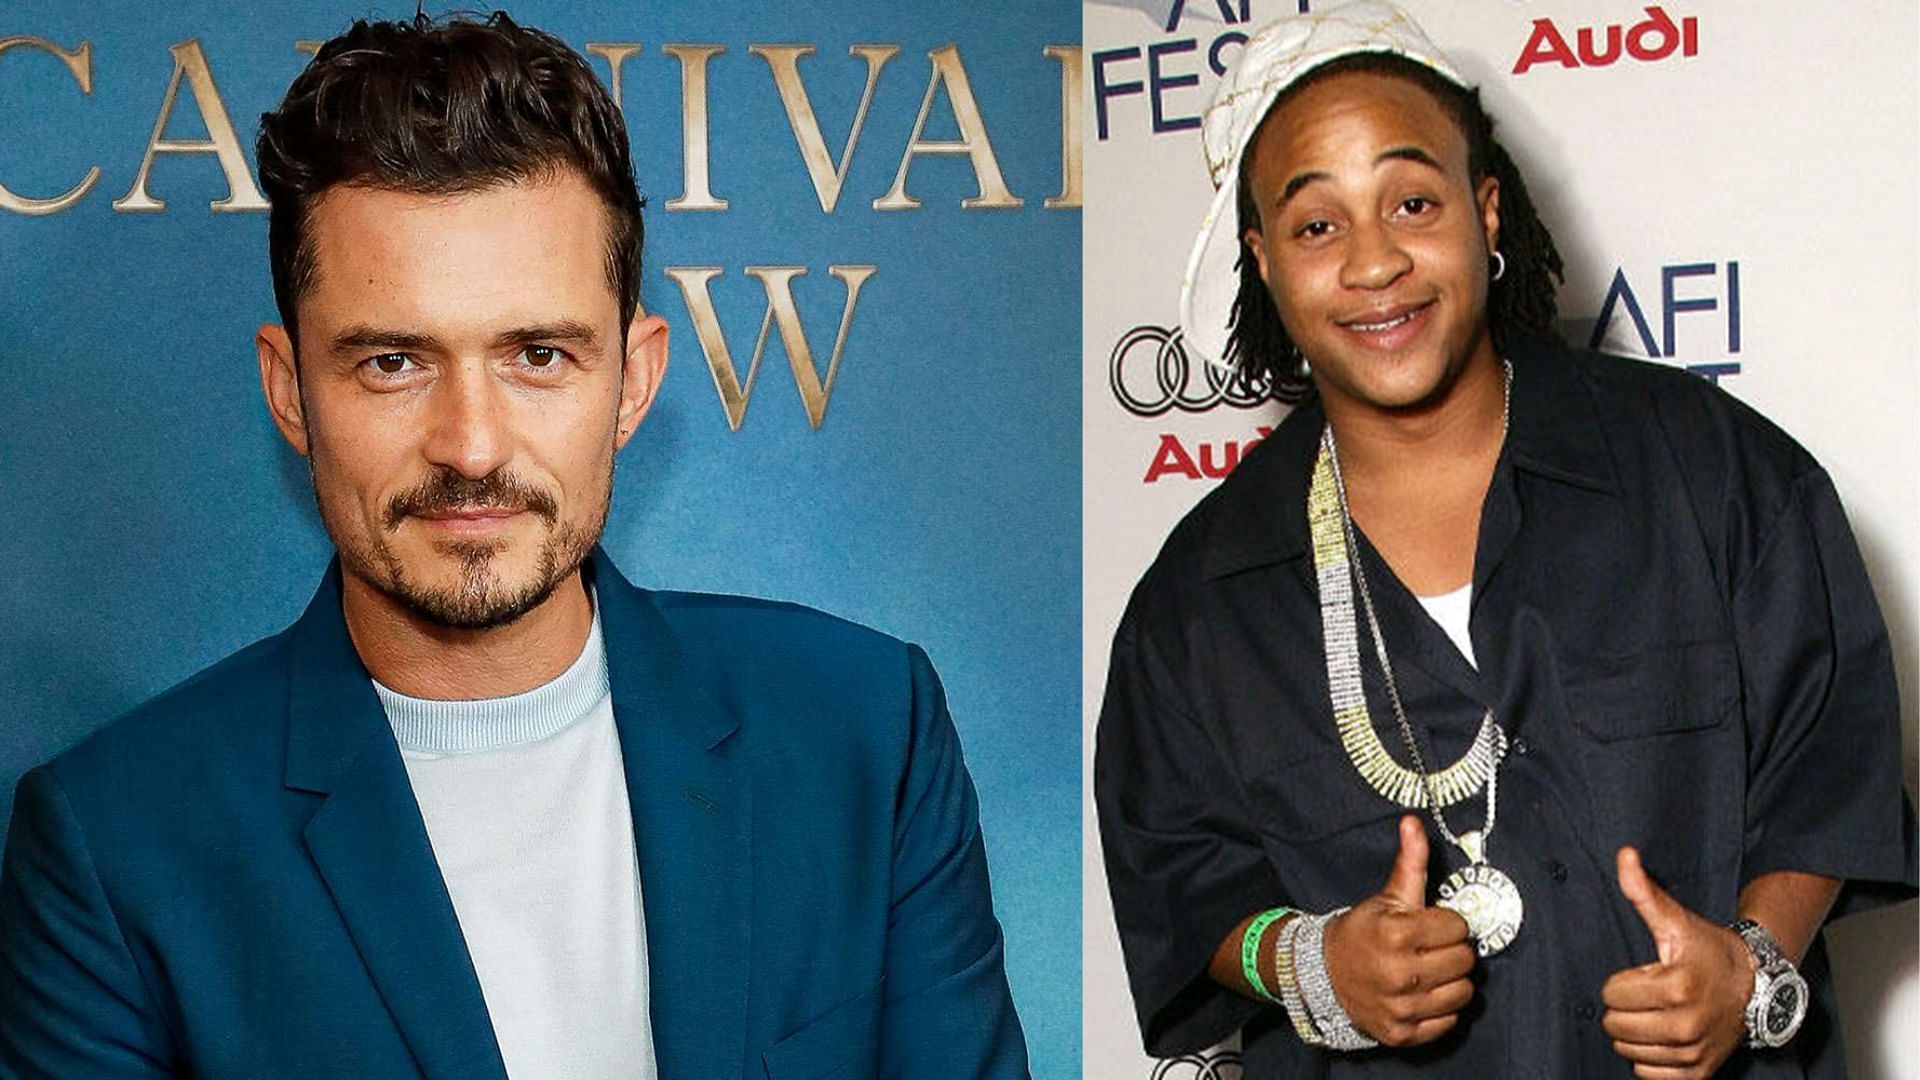 Orlando Bloom (L) and Orlando Brown (R) caught up in an information mix up (Image via Getty/Dave Bennett)